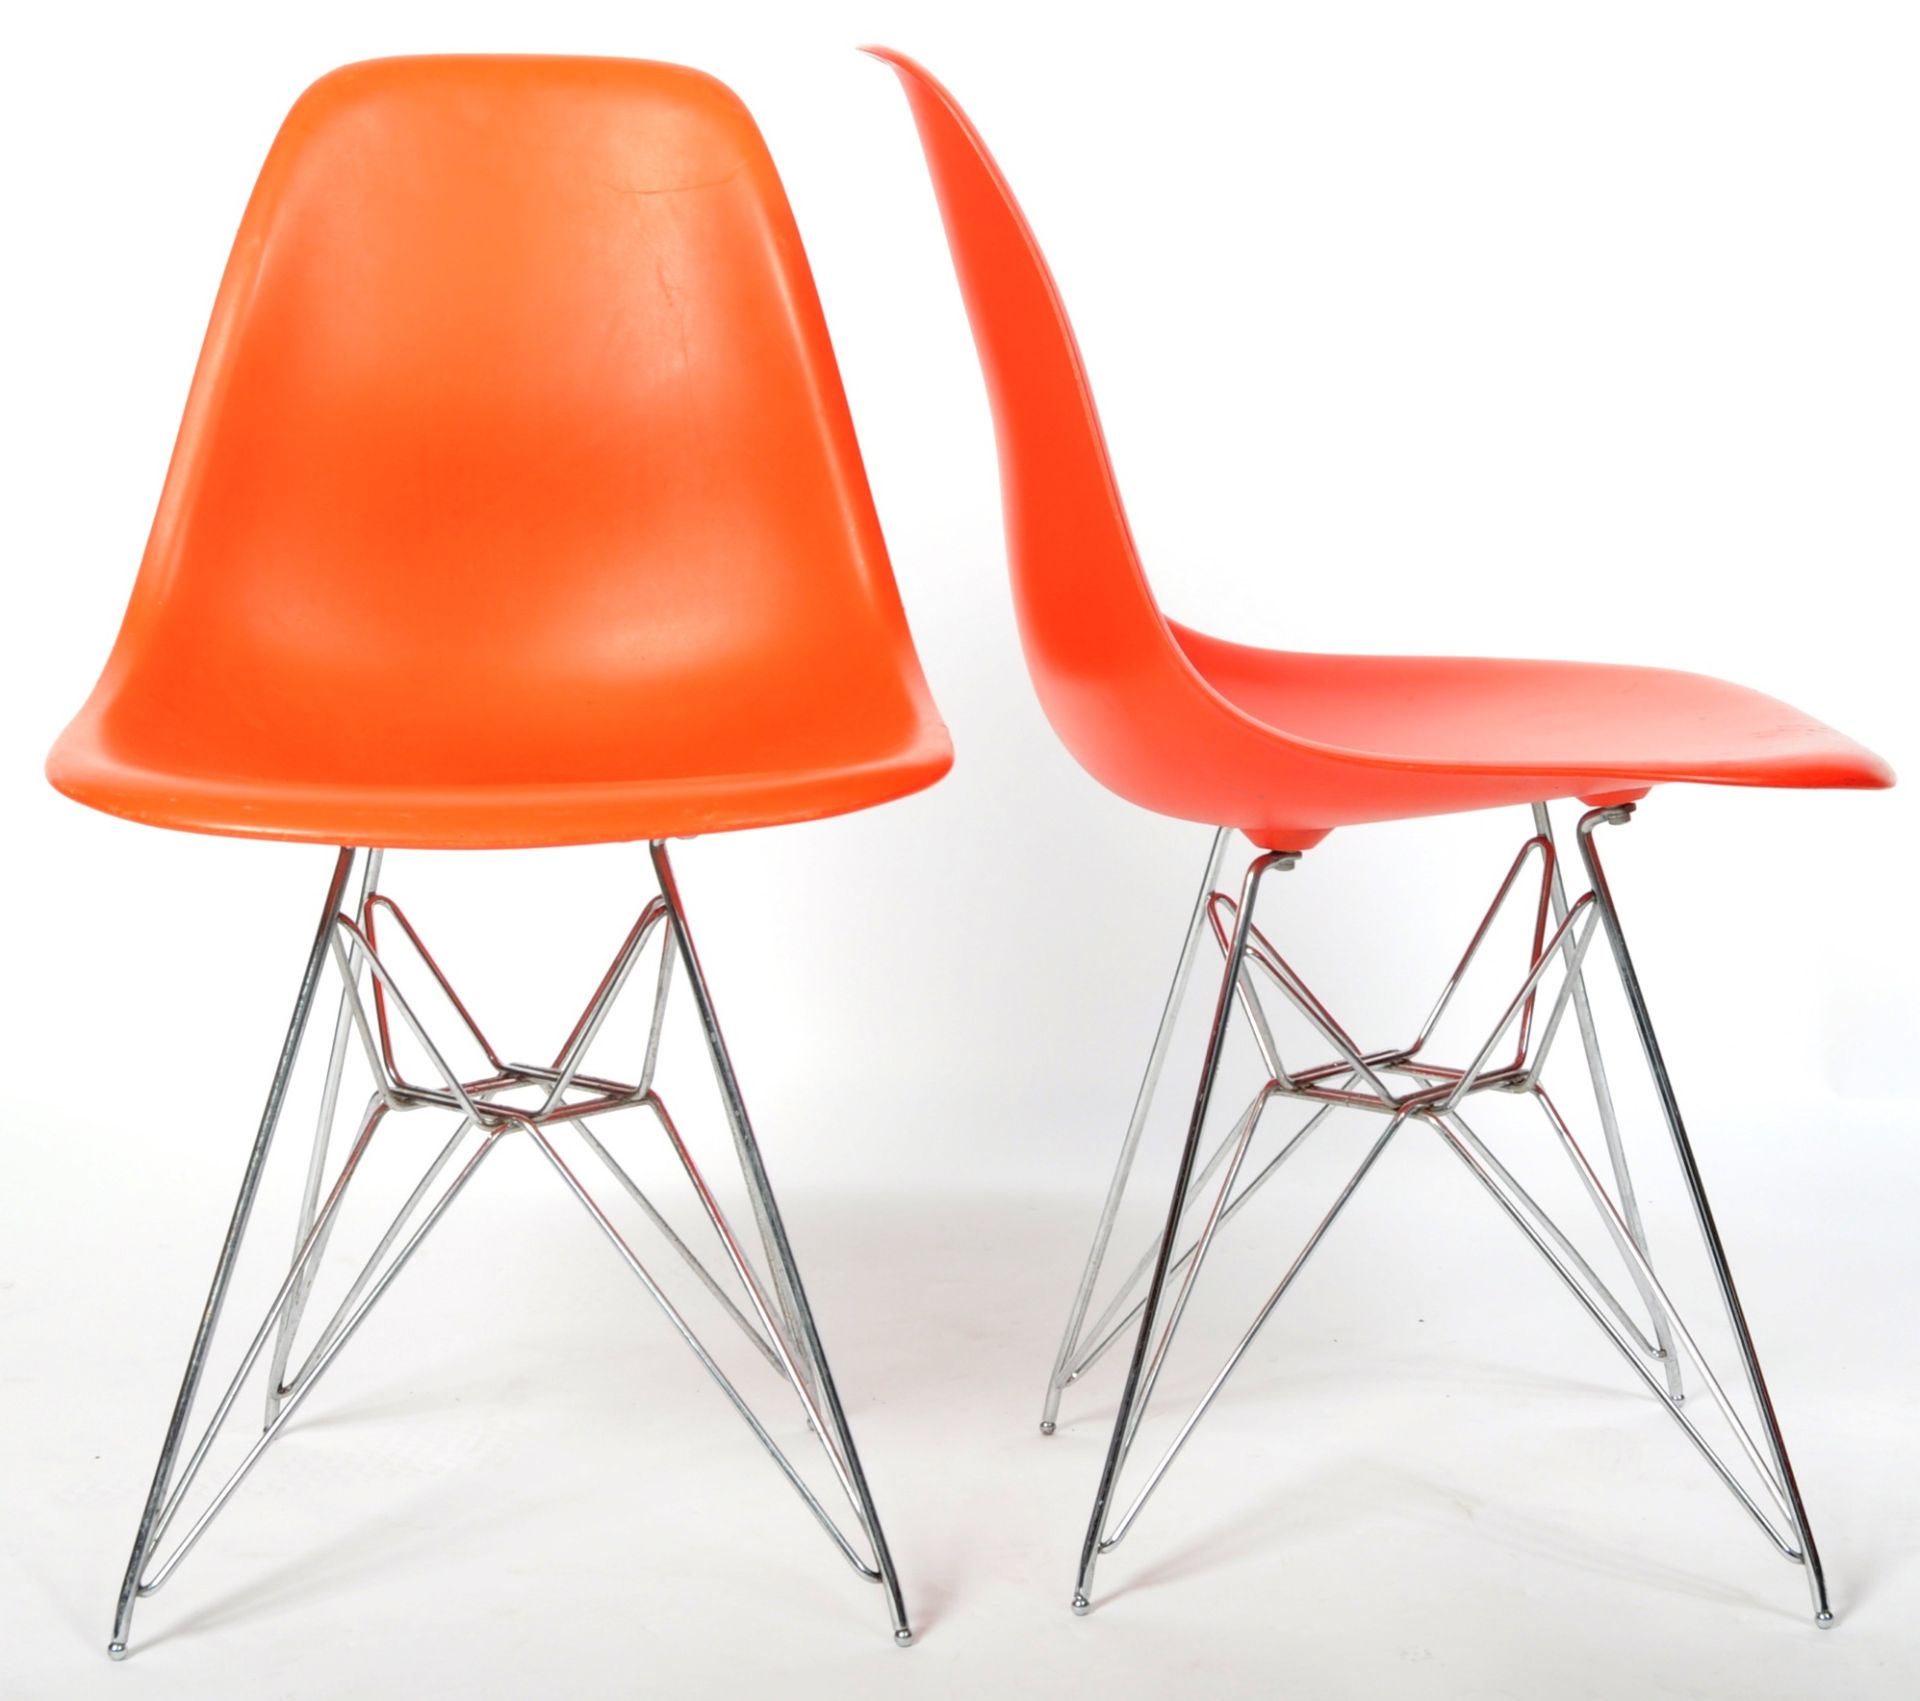 CHARLES & RAY EAMES FOR VITRA - SET OF SIX DSR EAMES PLASTIC CHAIRS - Image 7 of 10